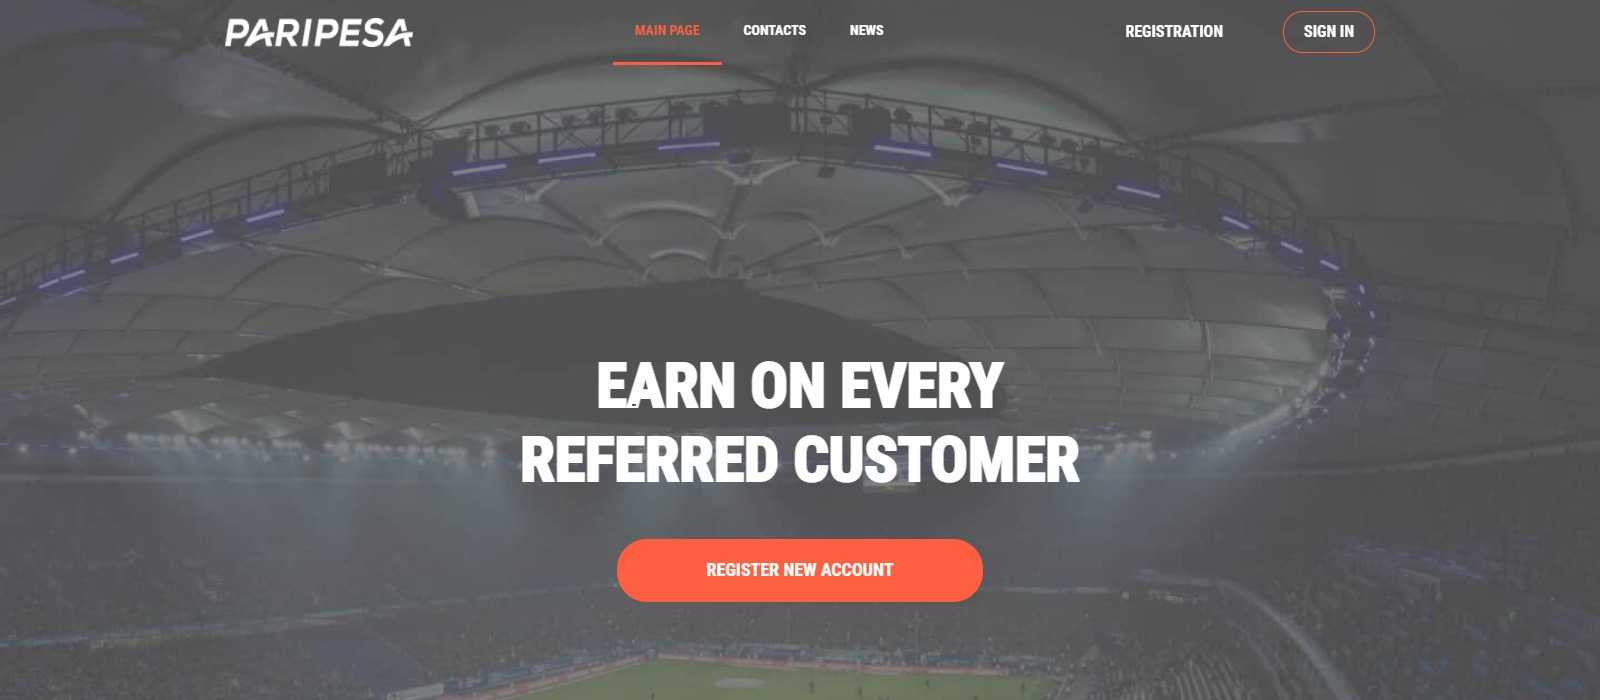 Paripesa Partners Affiliate Program Review: Get Earn Up to 45% recurring Revenue share